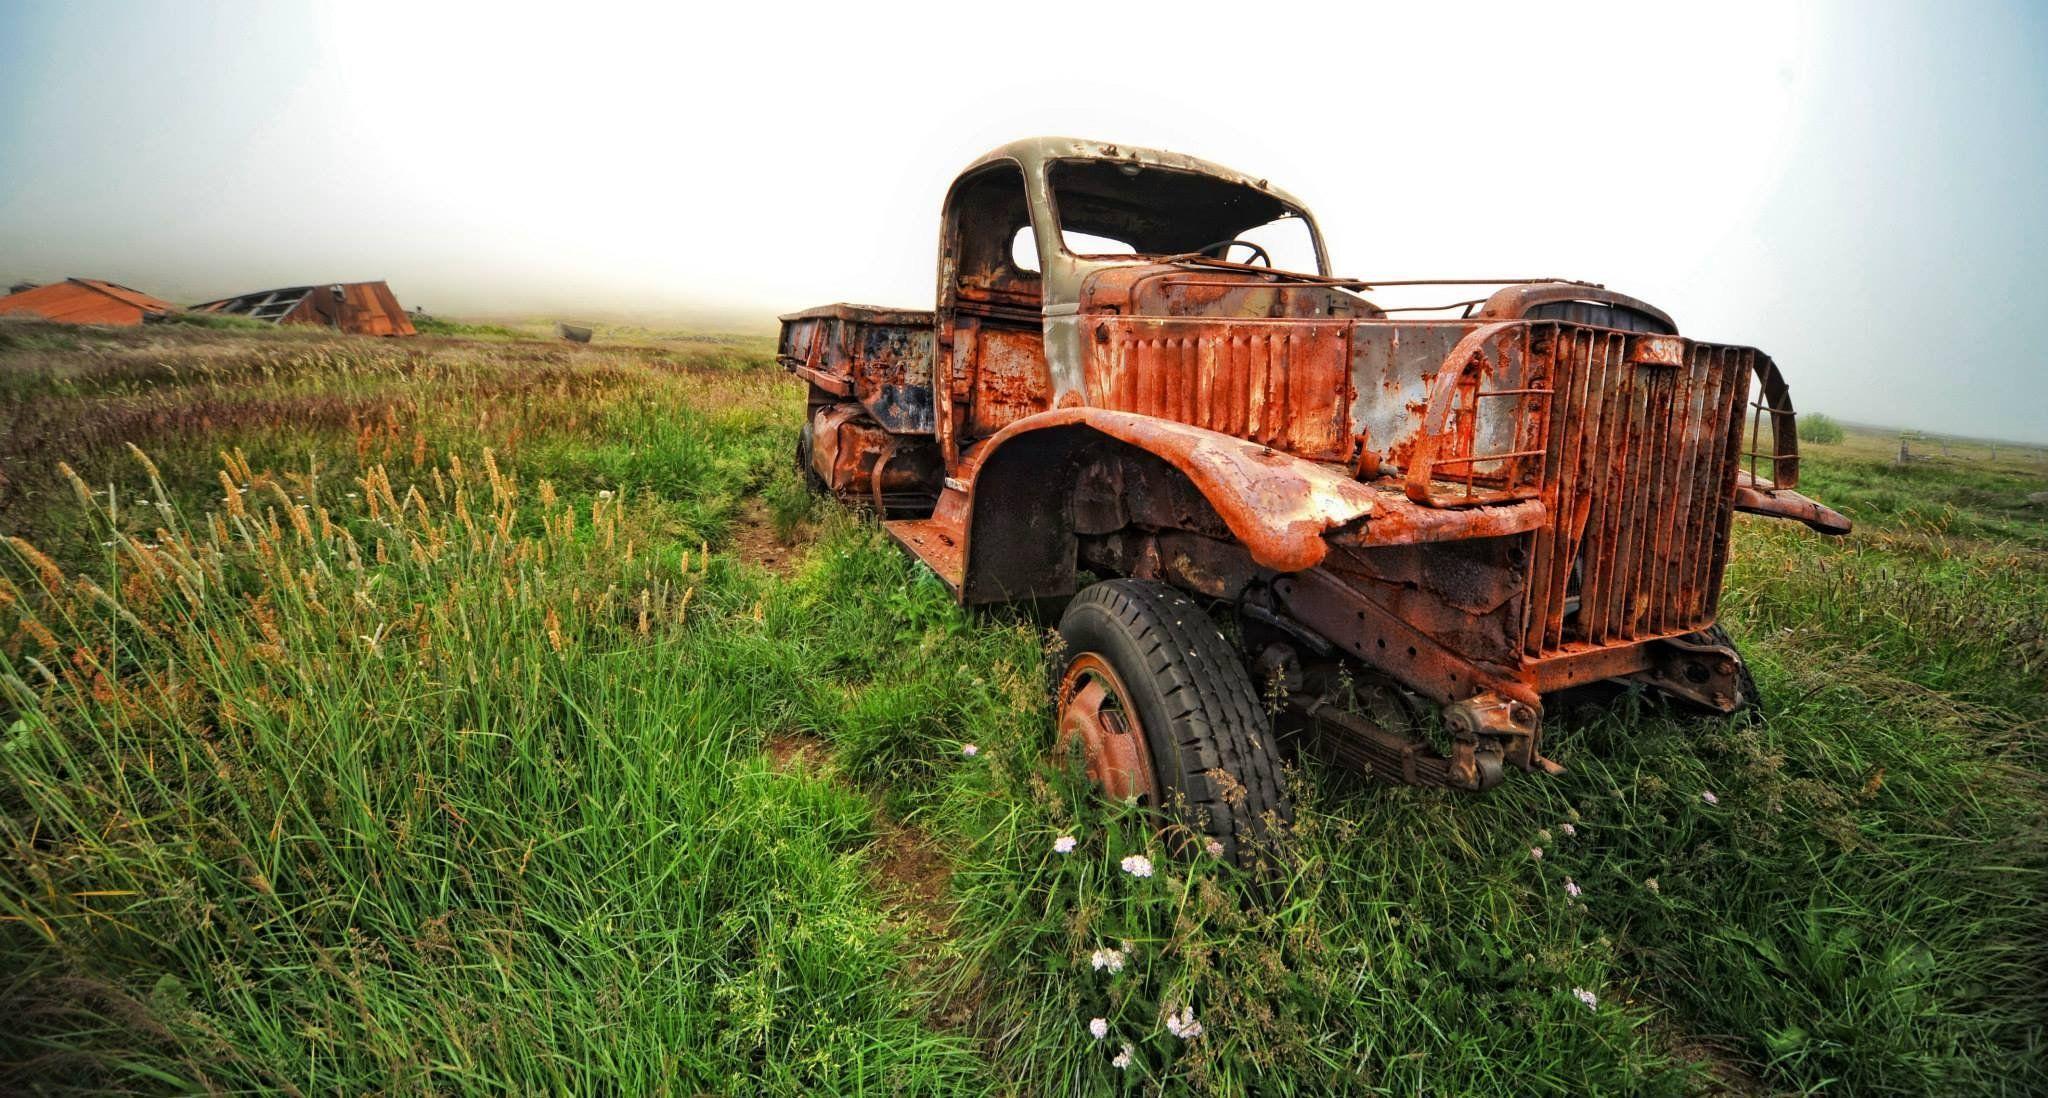 Old Truck Wallpaper High Definition Truck Old Car Rusty Muscle